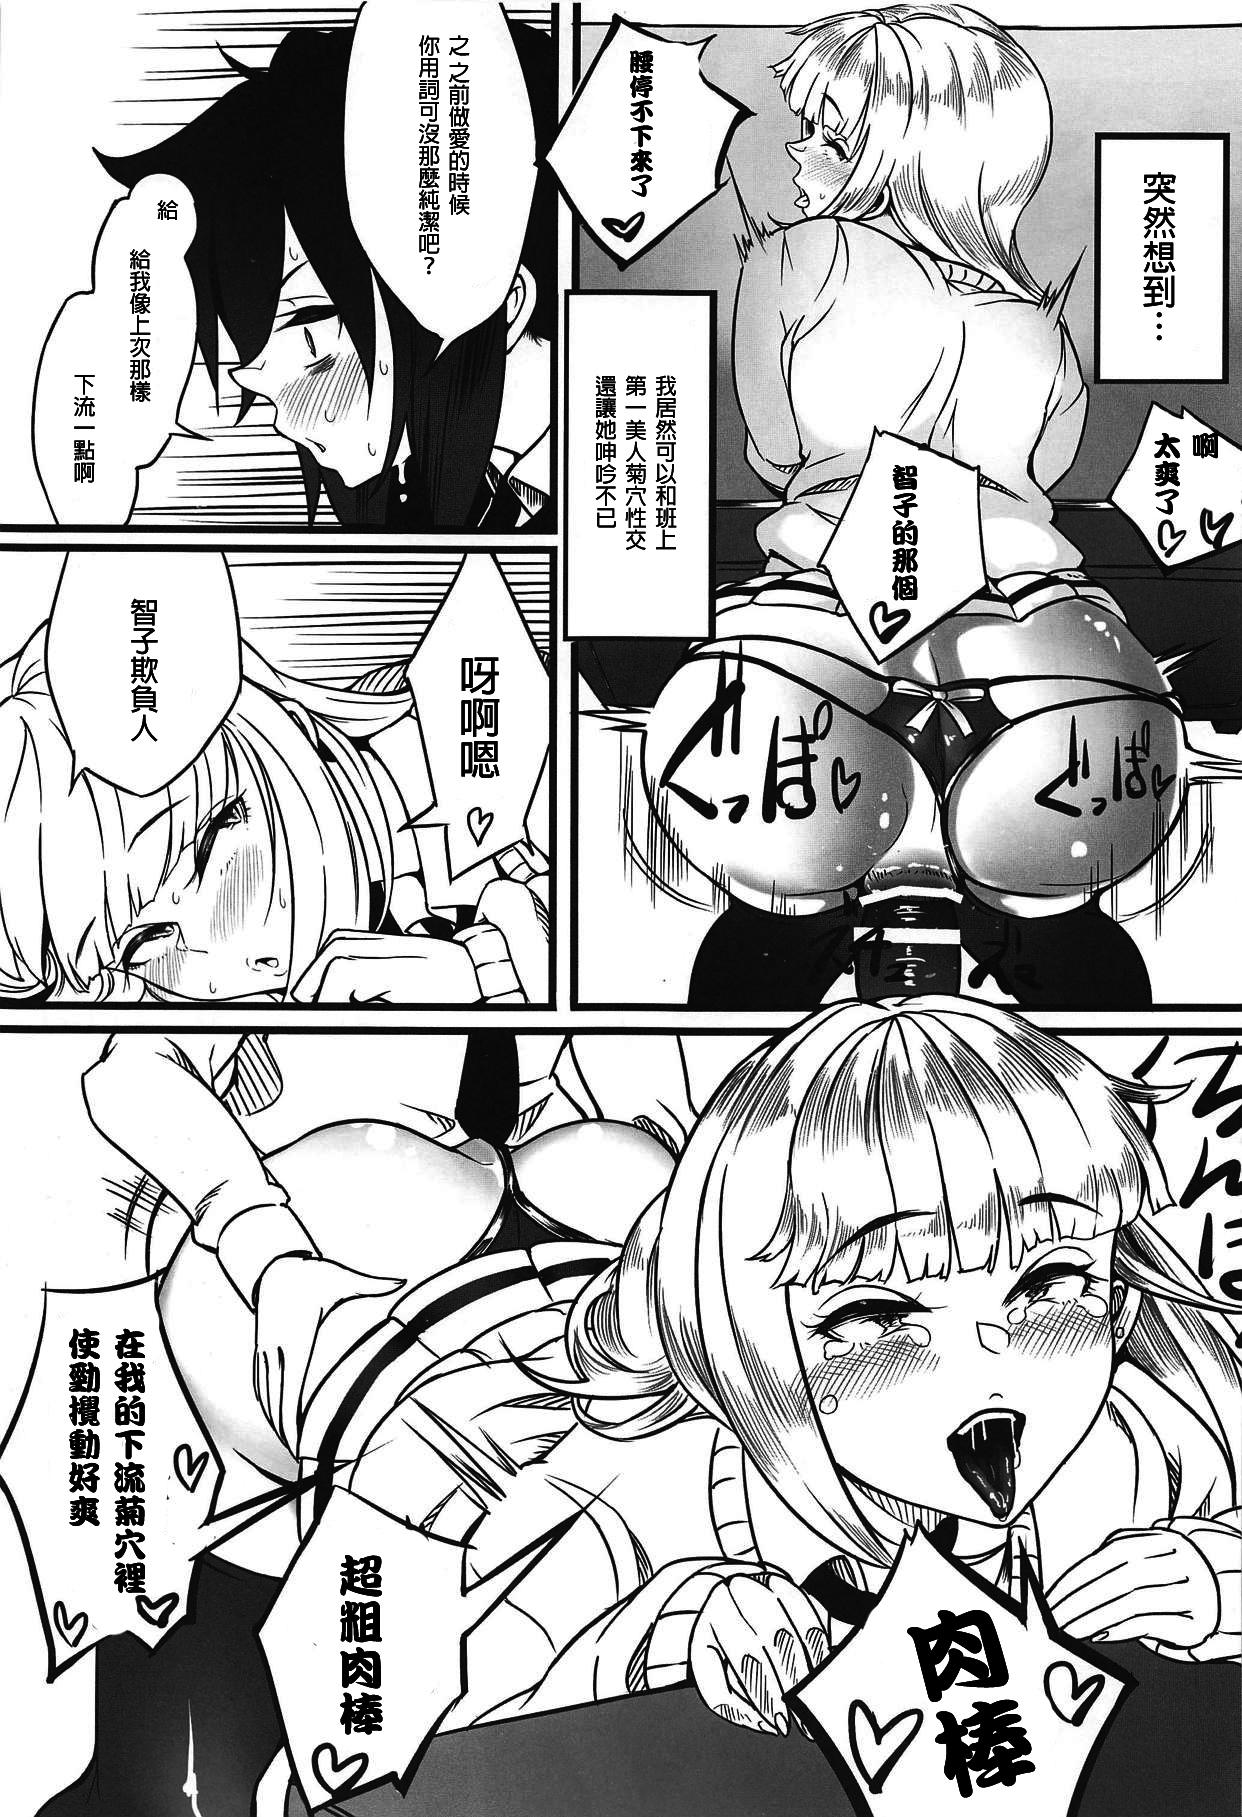 Stepsiblings Yuri-chan to Asobo 丨也和百合一起玩嘛 - Its not my fault that im not popular Doggy - Page 9